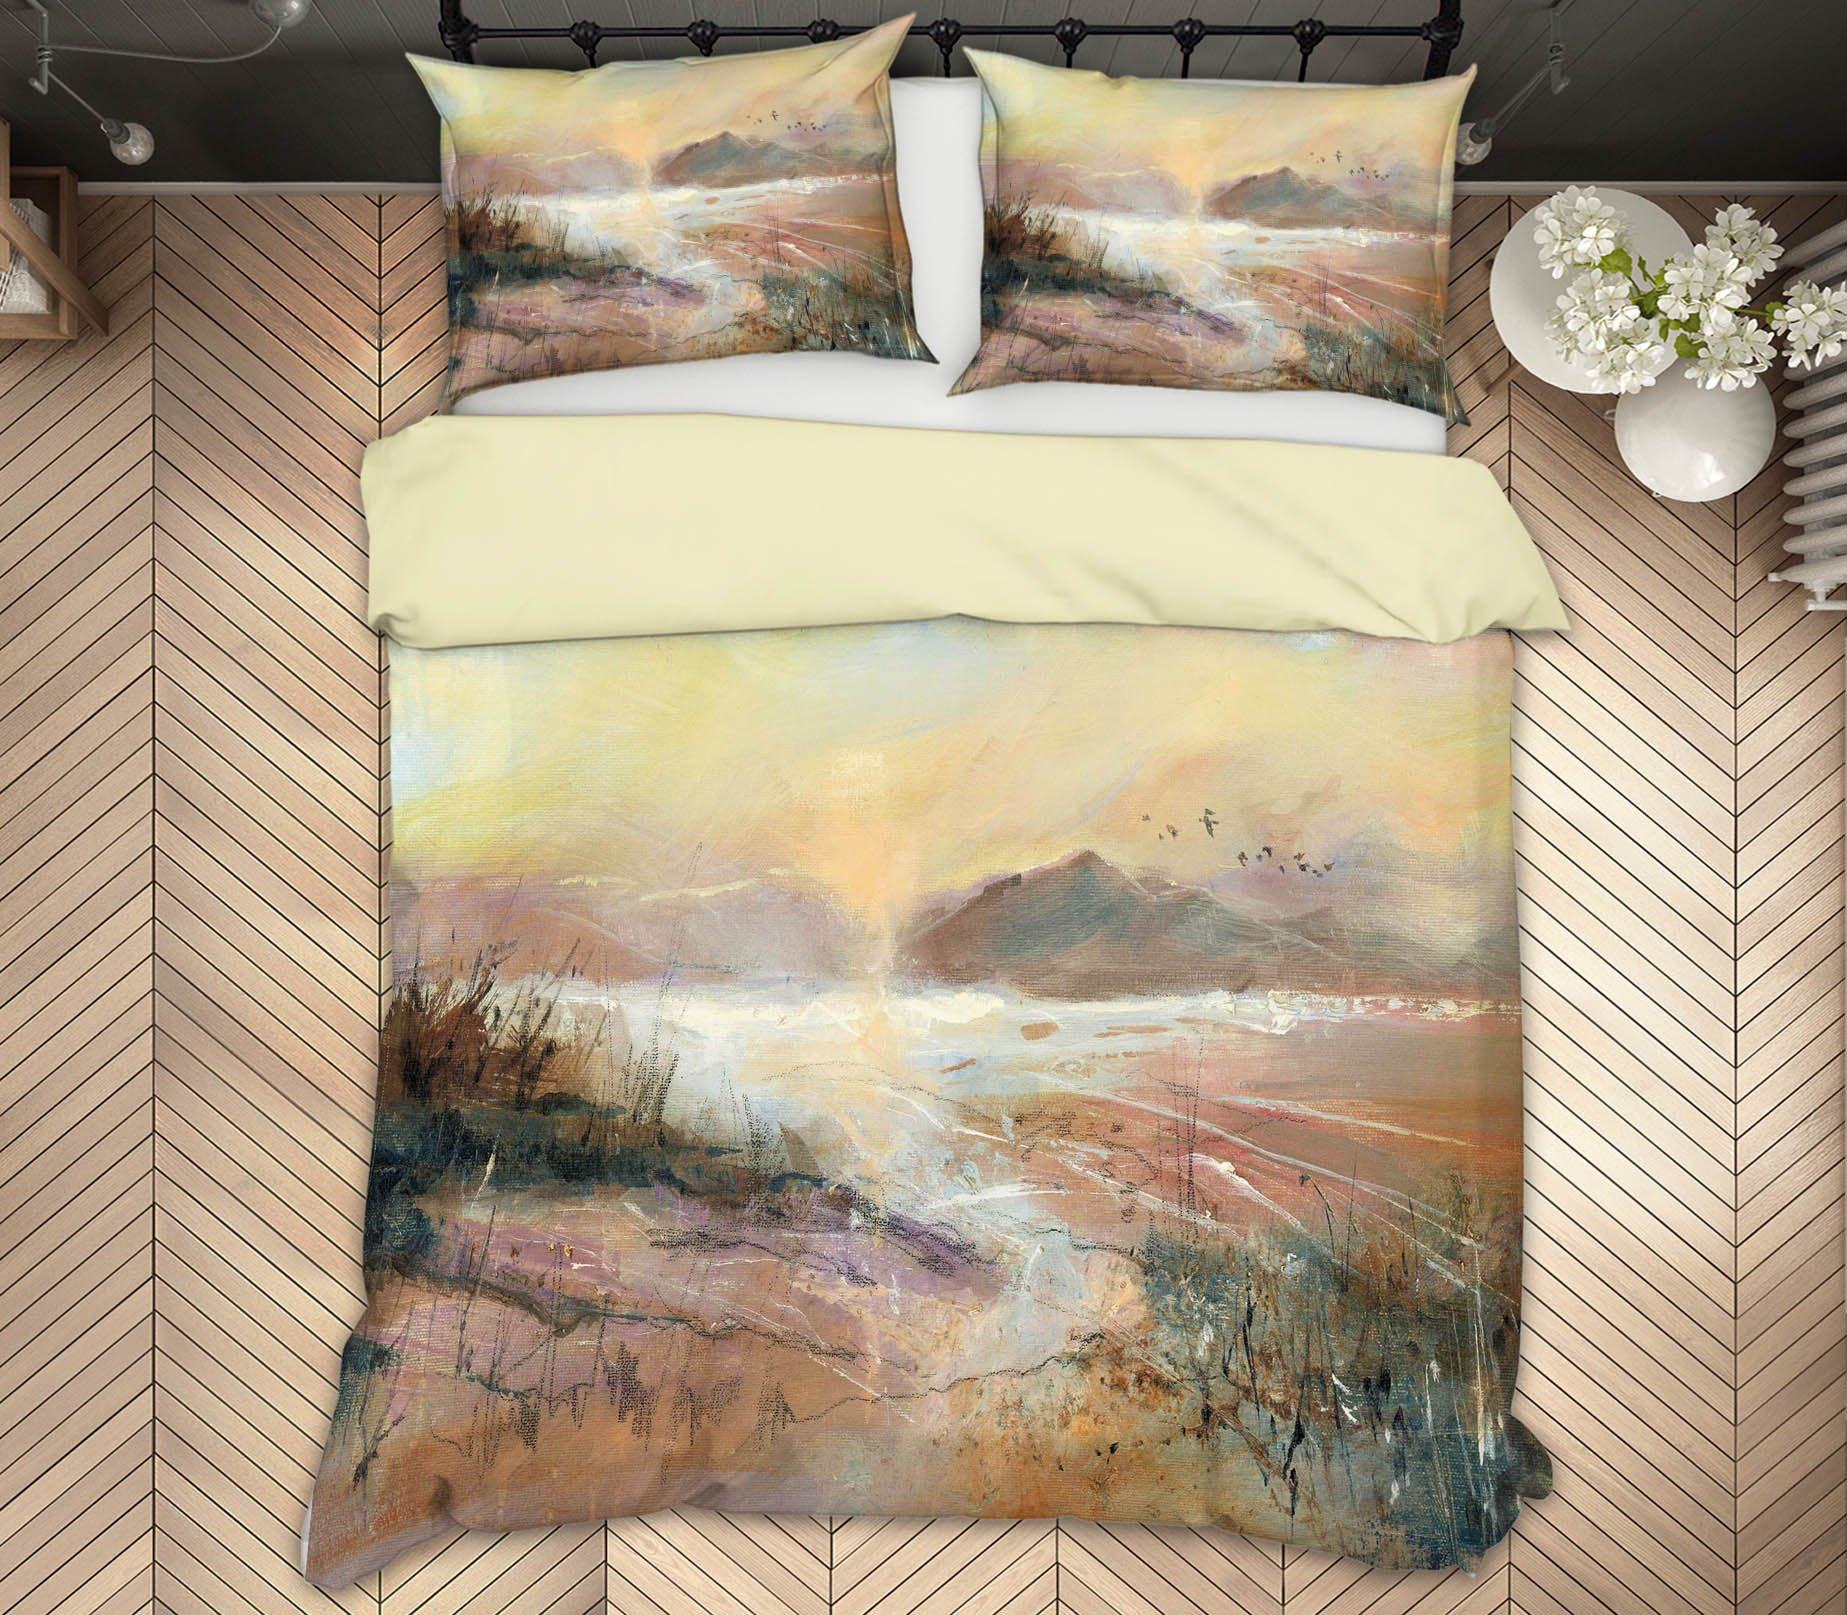 3D Beautiful Mountain 2002 Anne Farrall Doyle Bedding Bed Pillowcases Quilt Quiet Covers AJ Creativity Home 